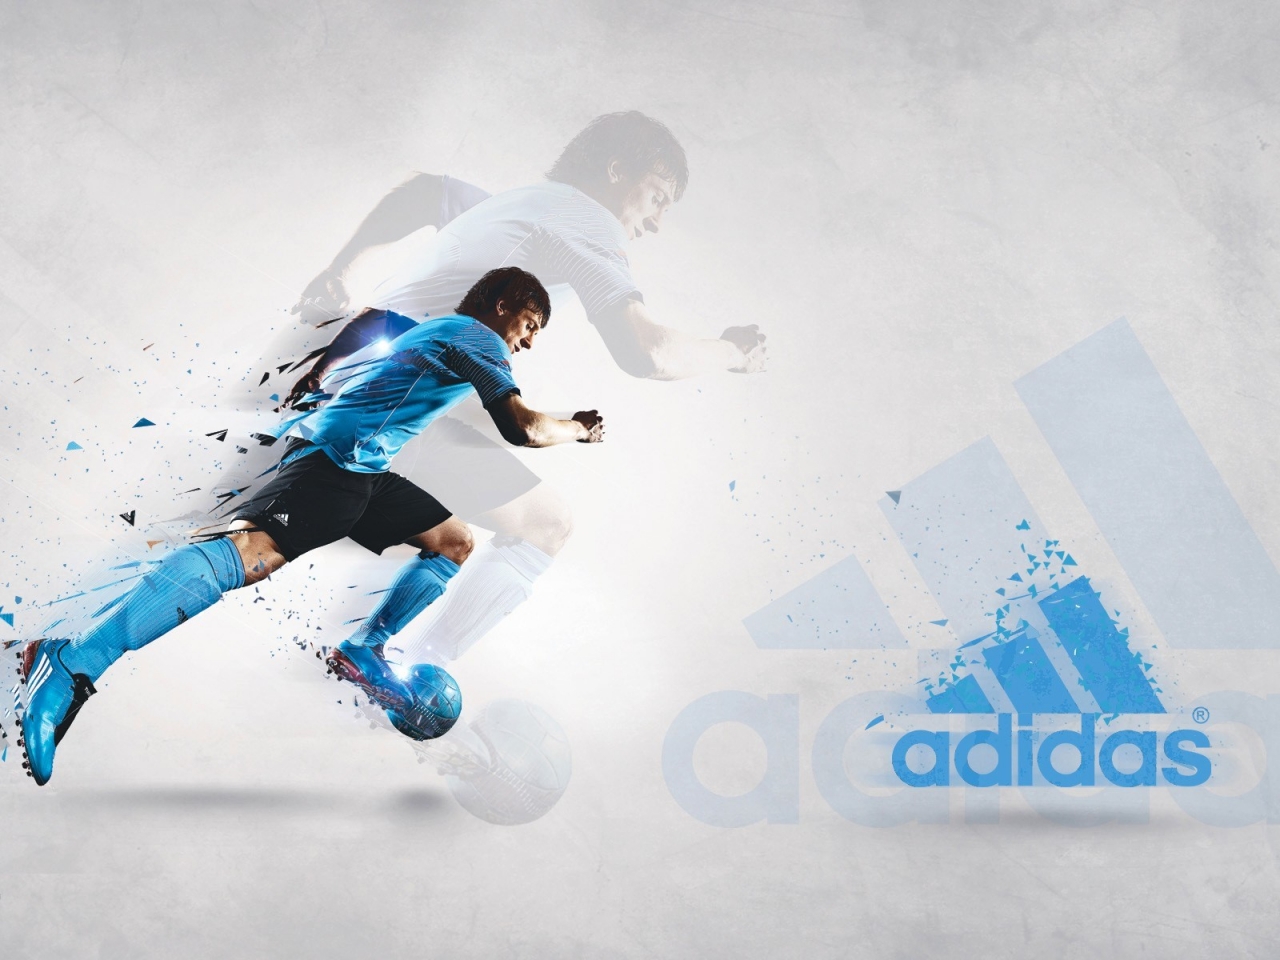 Adidas Poster for 1280 x 960 resolution